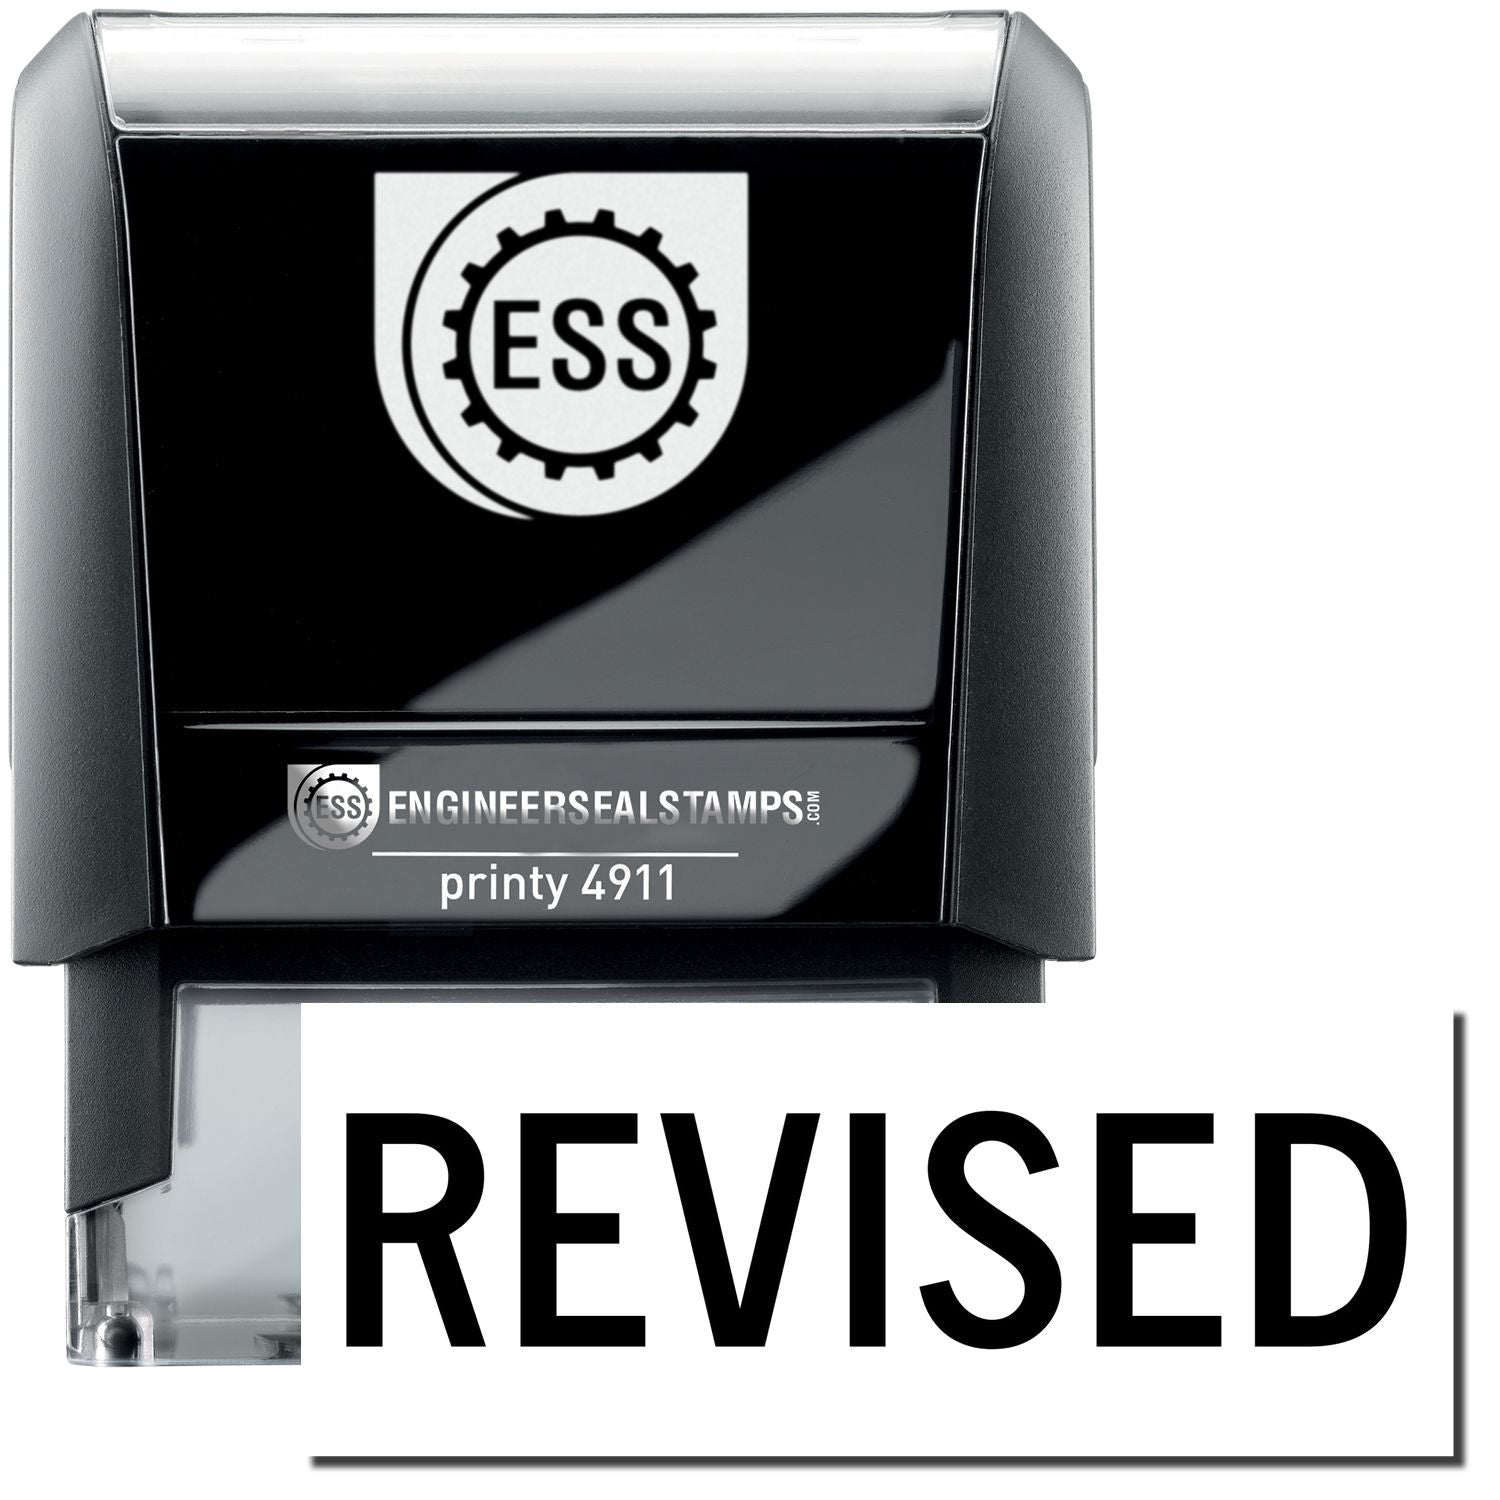 A self-inking stamp with a stamped image showing how the text "REVISED" is displayed after stamping.